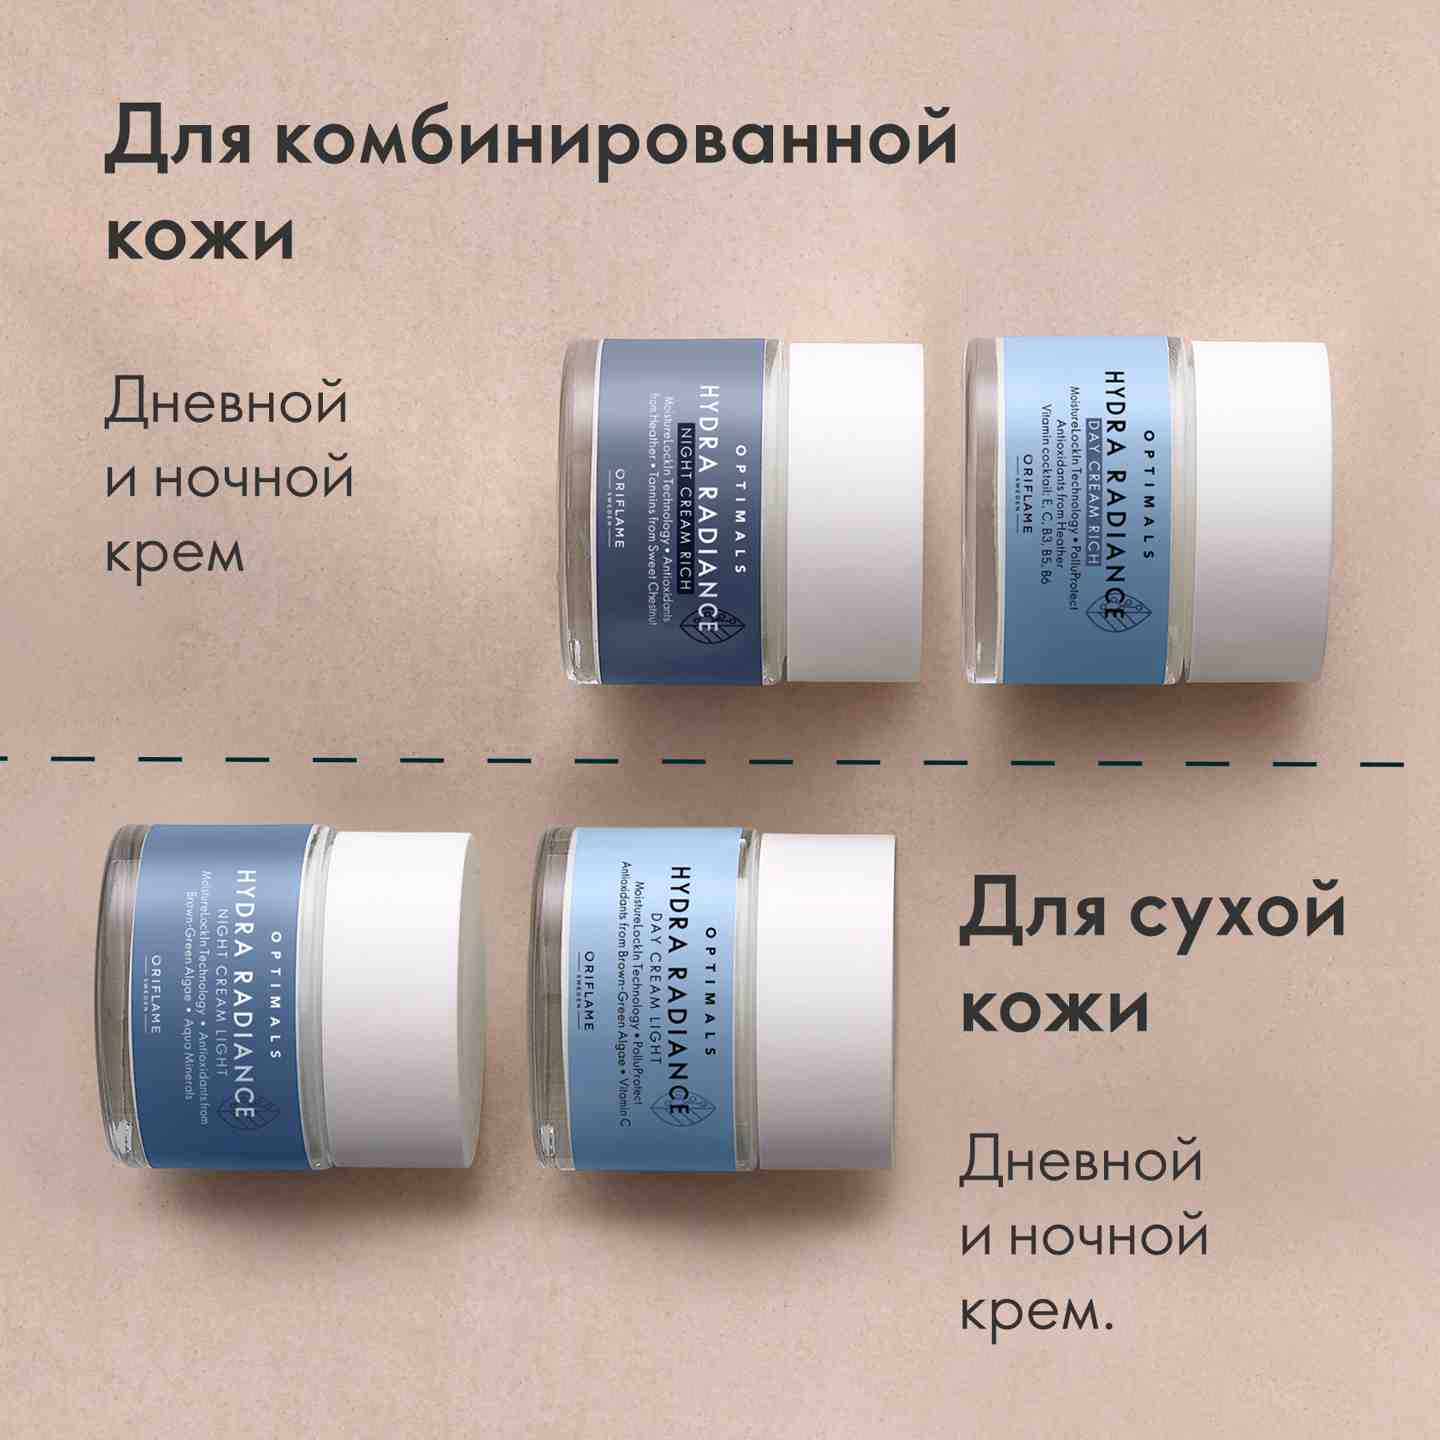 https://media-cdn.oriflame.com/productImage?externalMediaId=product-management-media%2fProducts%2f42589%2fGE%2f42589_4.png&id=15124888&version=1